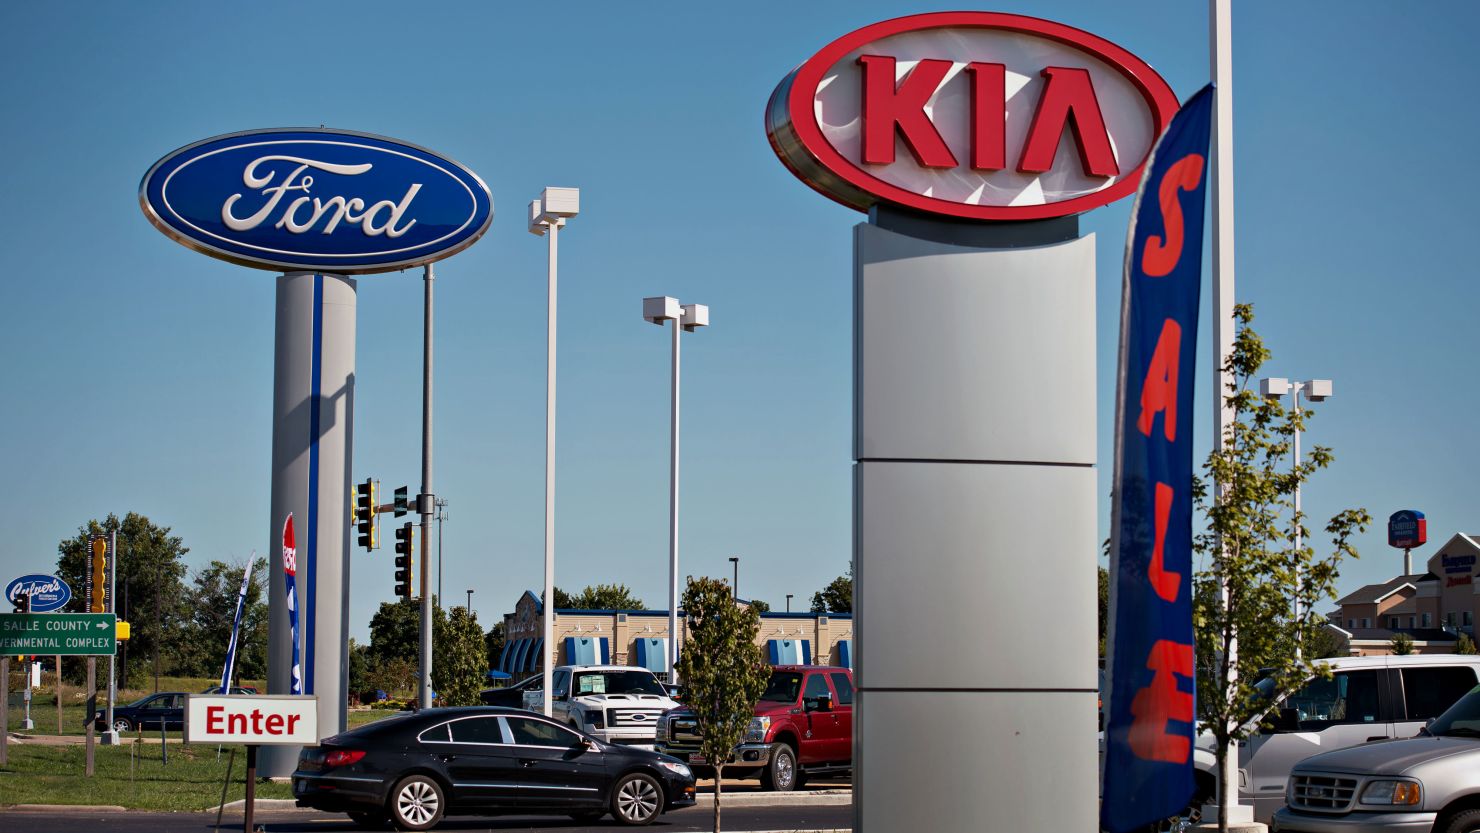 The EPA has challenged the gas mileage claims of some auto makers, including Kia and Ford.